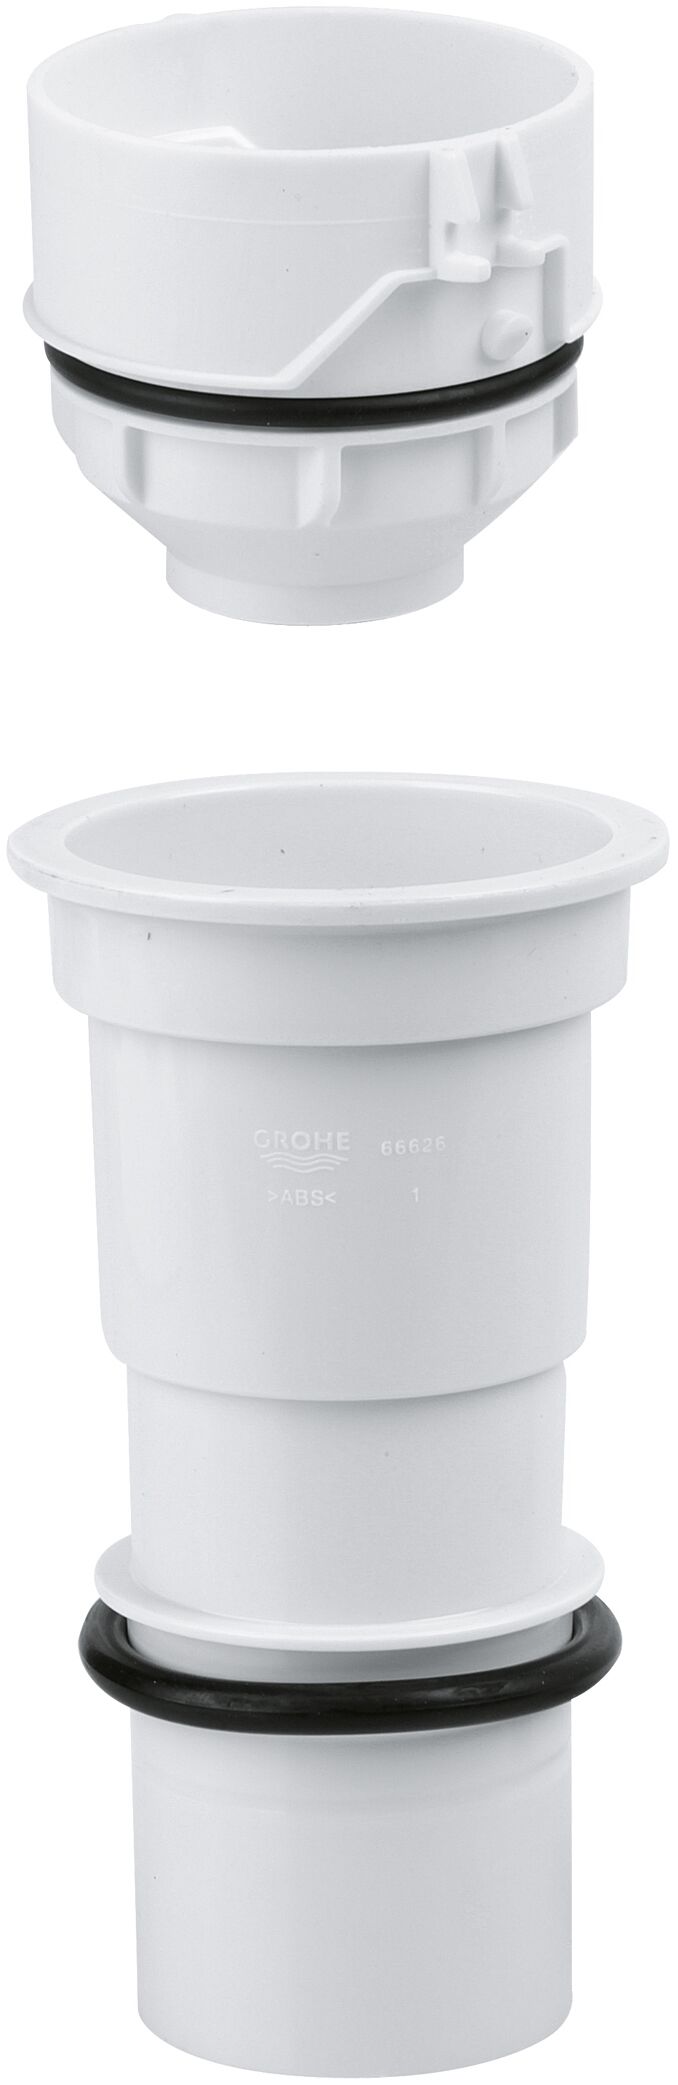 Grohe adapter 42333000 4.5 l, for GD 2